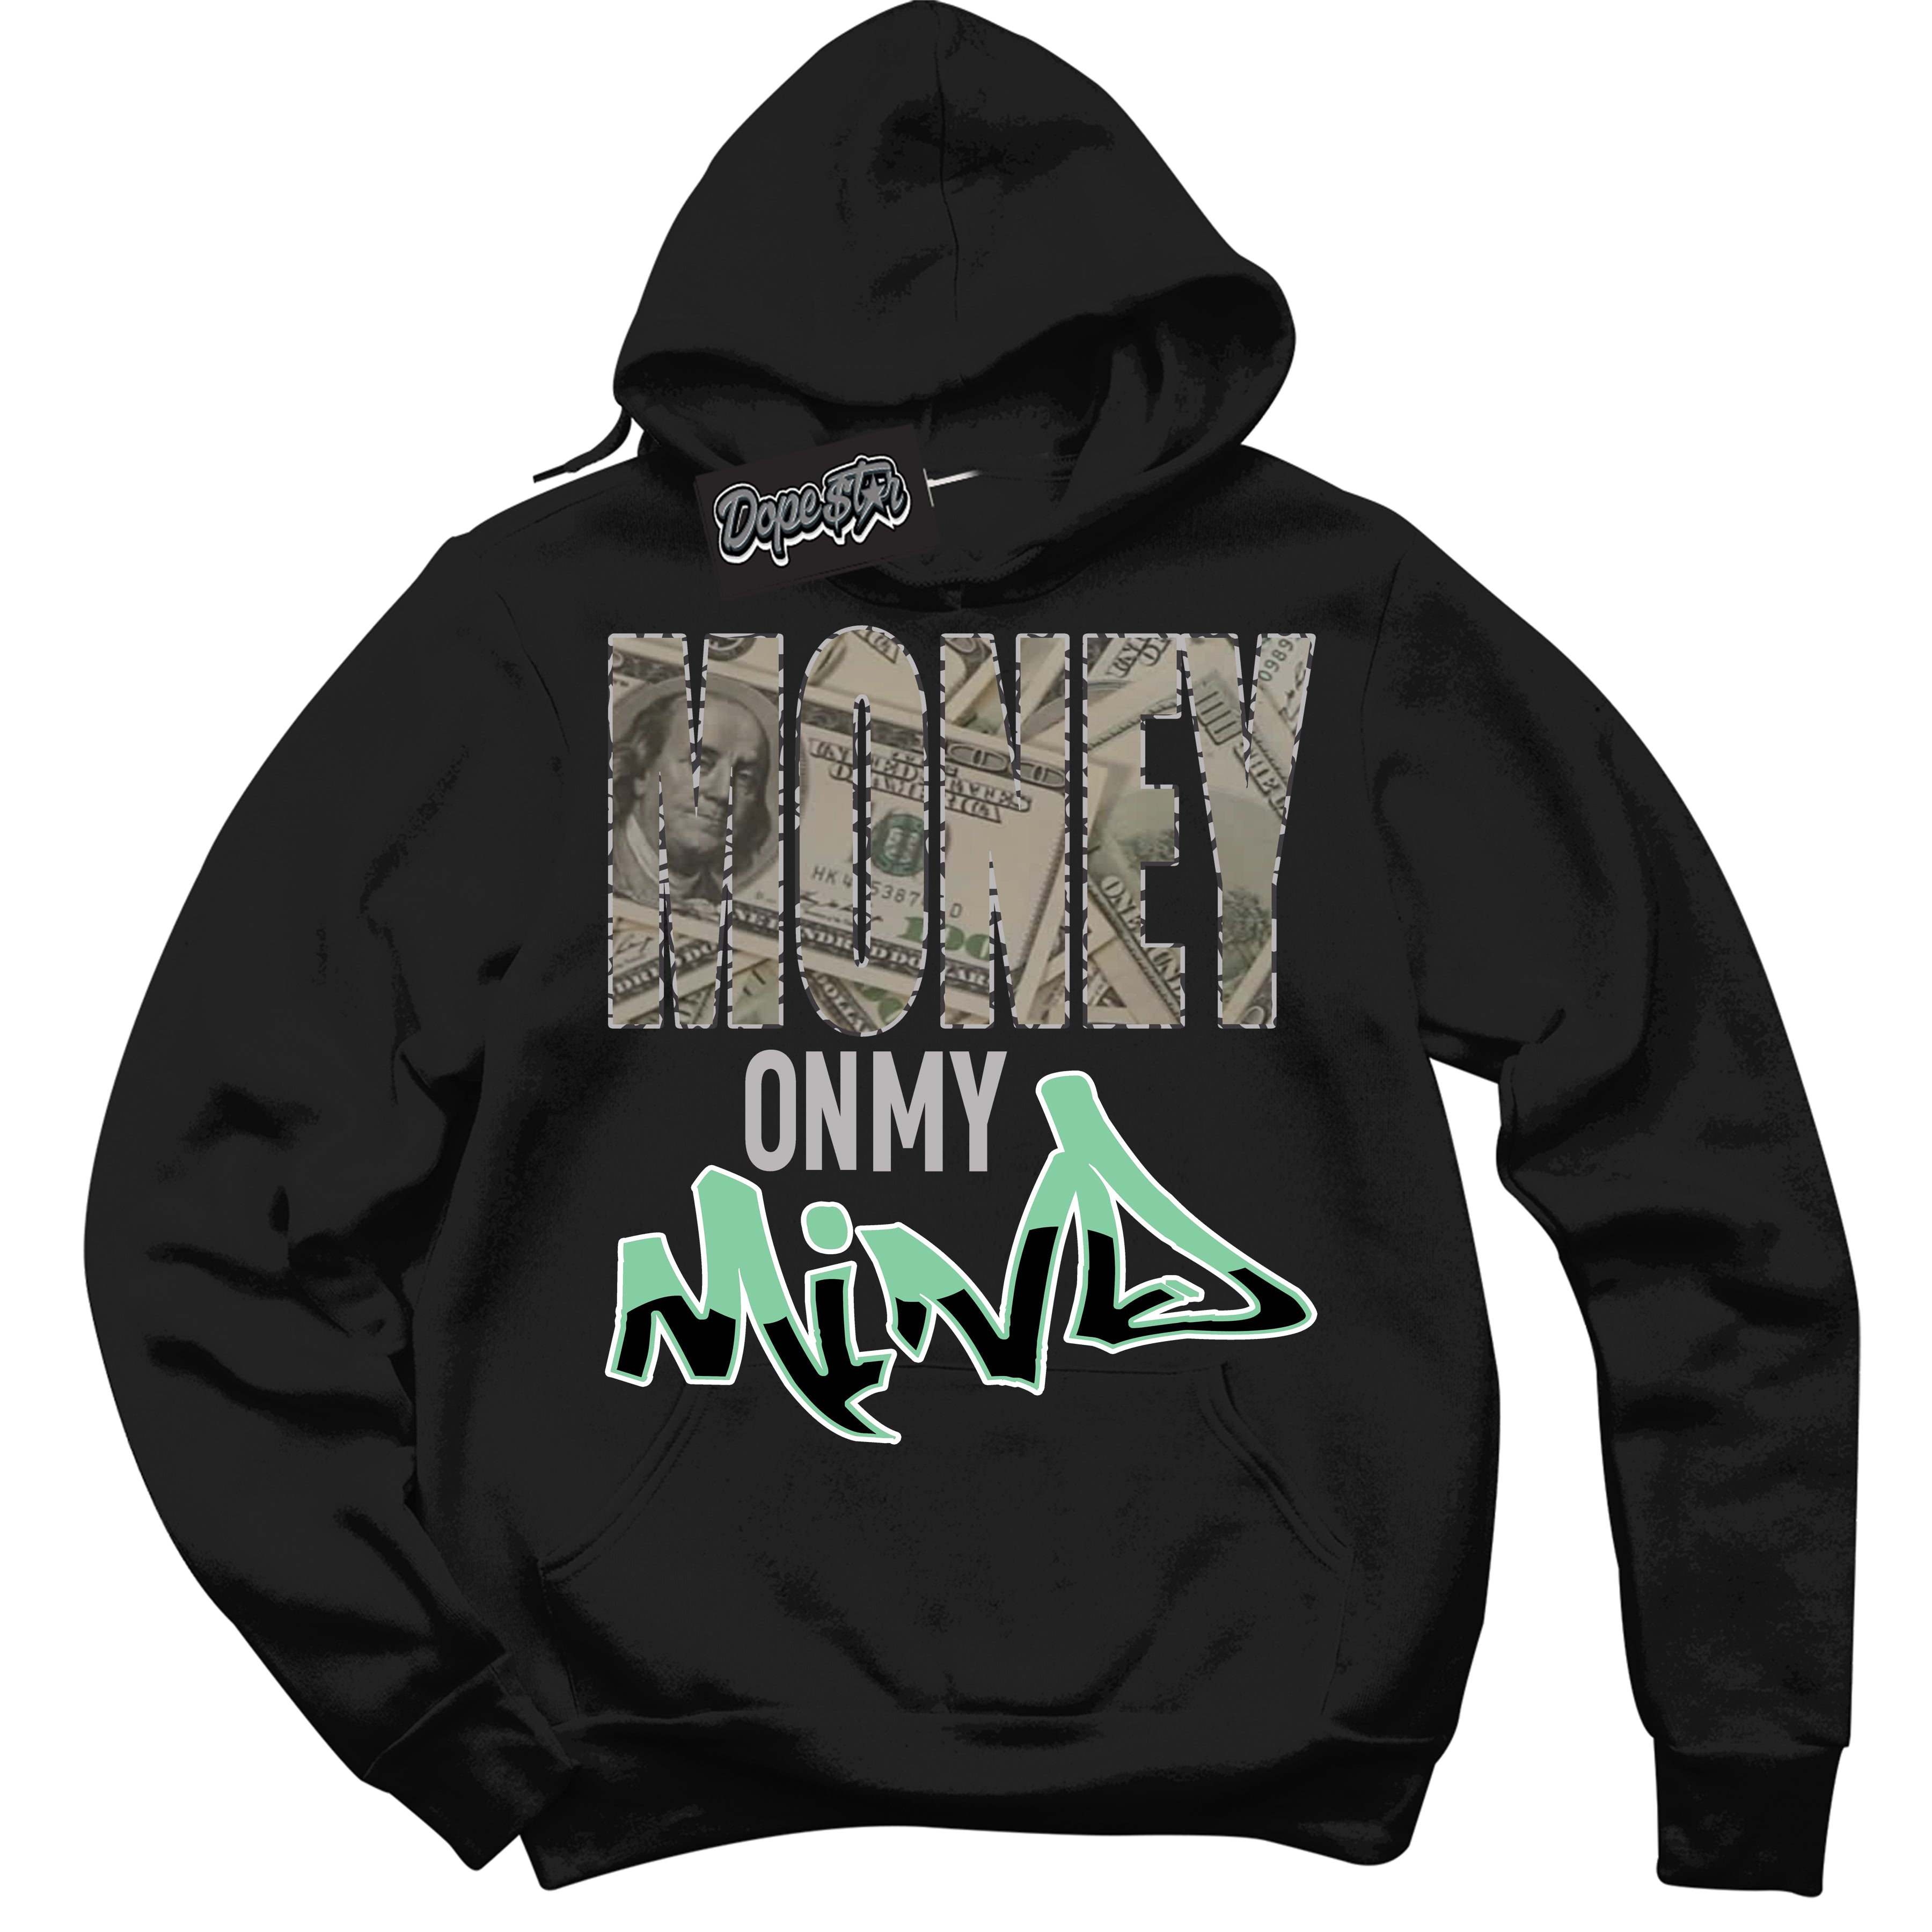 Cool Black Graphic DopeStar Hoodie with “ Money On My Mind “ print, that perfectly matches Green Glow 3S sneakers